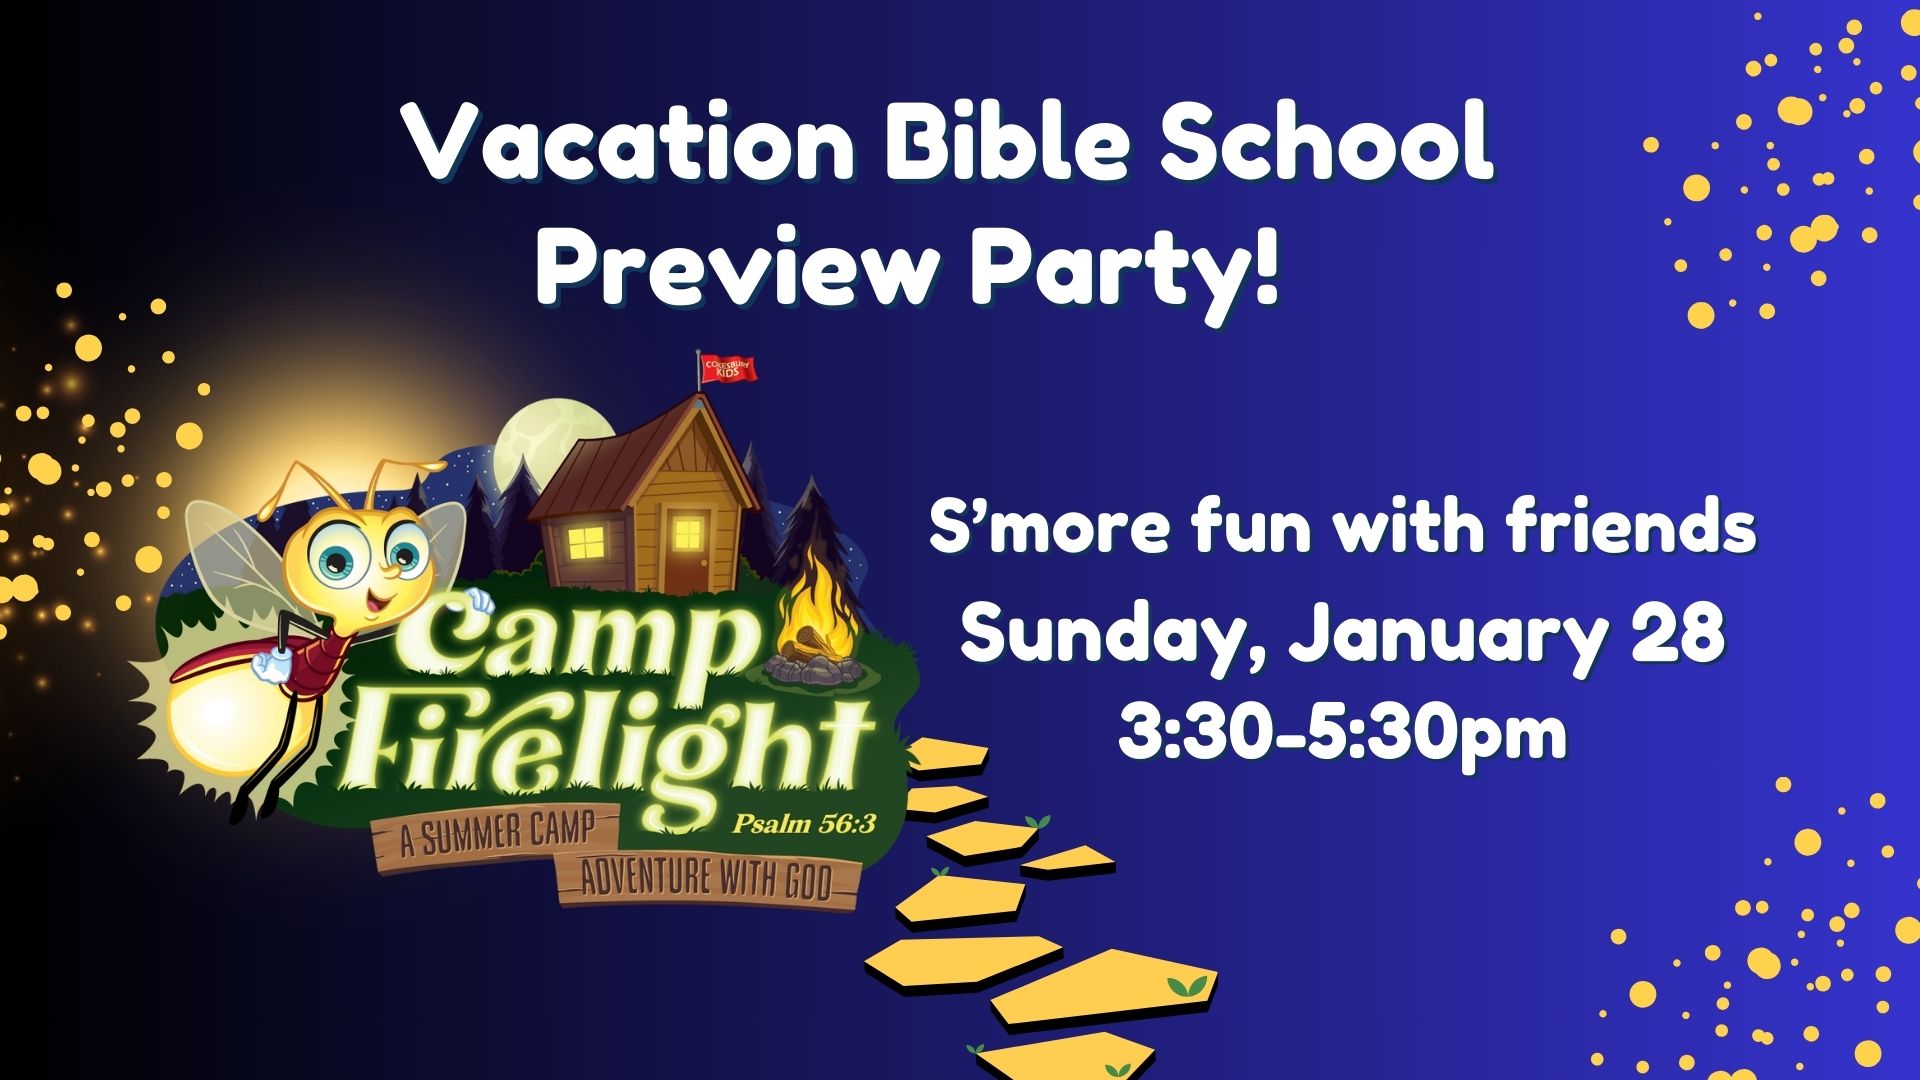 VBS 2024 Preview Events - VBS 2024